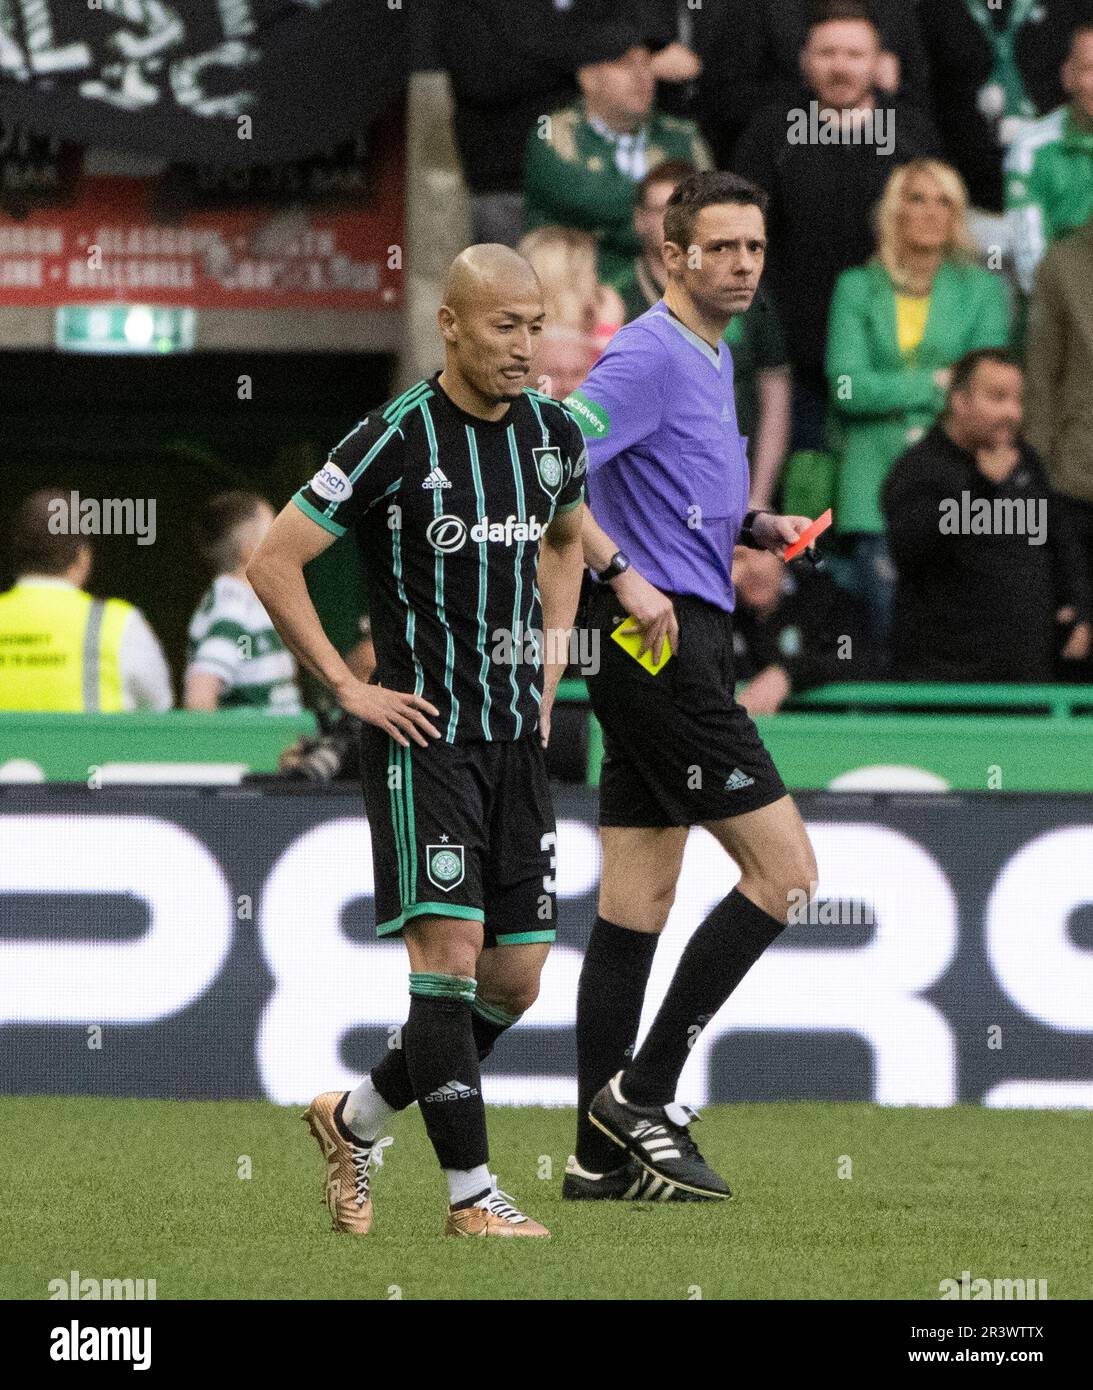 EDINBURGH, UK. 24th May, 2023. Celtic forward, Daizen Maeda, is given his marching order by Match referee, Kevin Clancy, during the match between Hibernian and Celtic in the cinch Premiership at Easter Road Stadium, Edinburgh, Midlothian, UK. 24/5/2023. Credit: Ian Jacobs/Alamy Live News Stock Photo